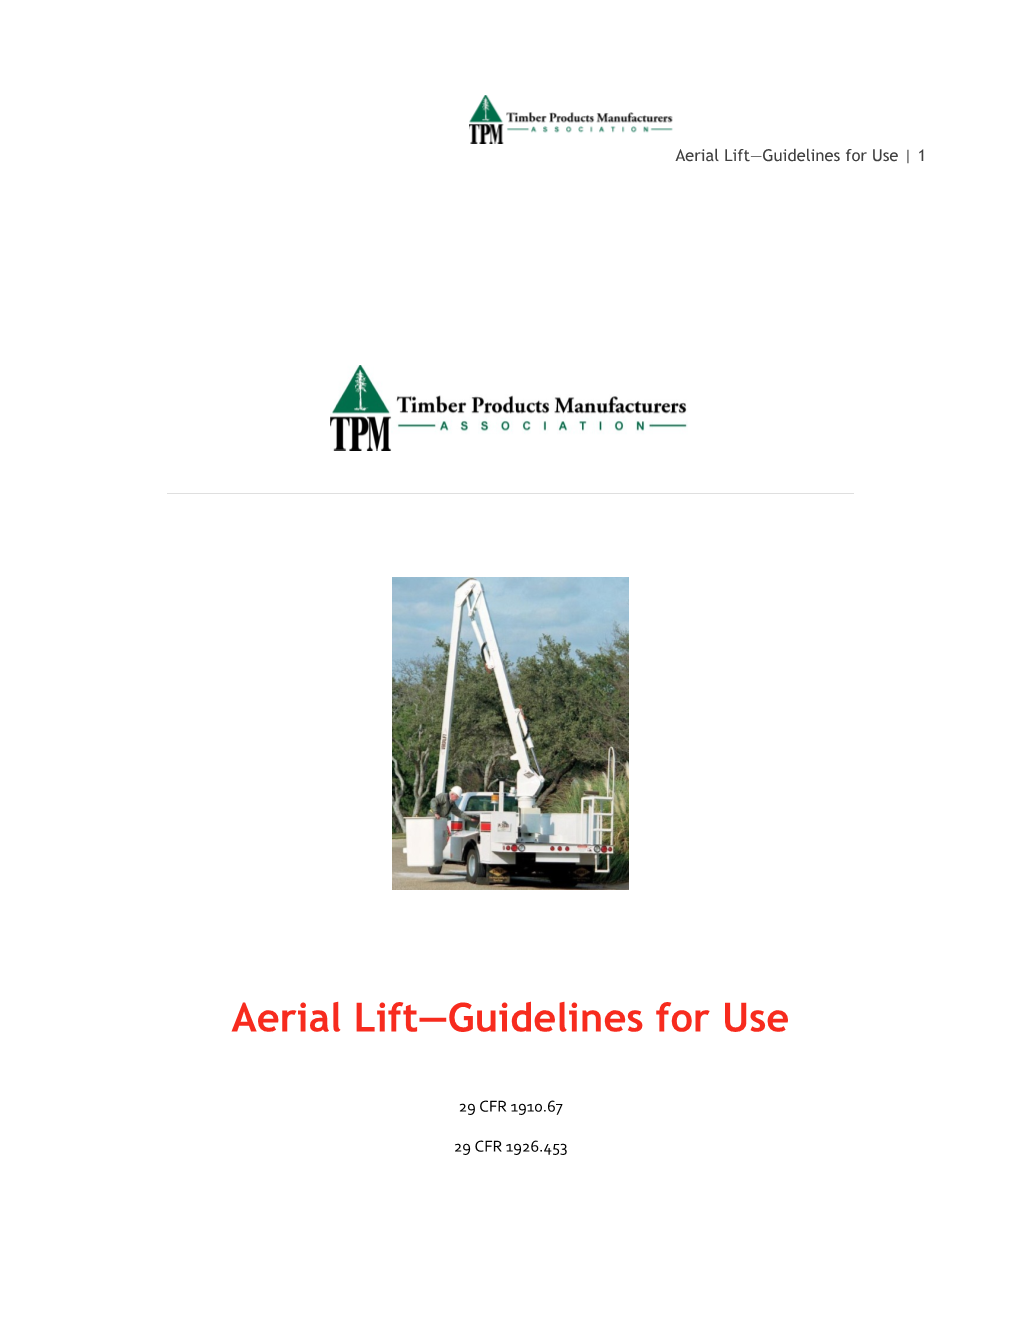 Aerial Lift Guidelines for Use